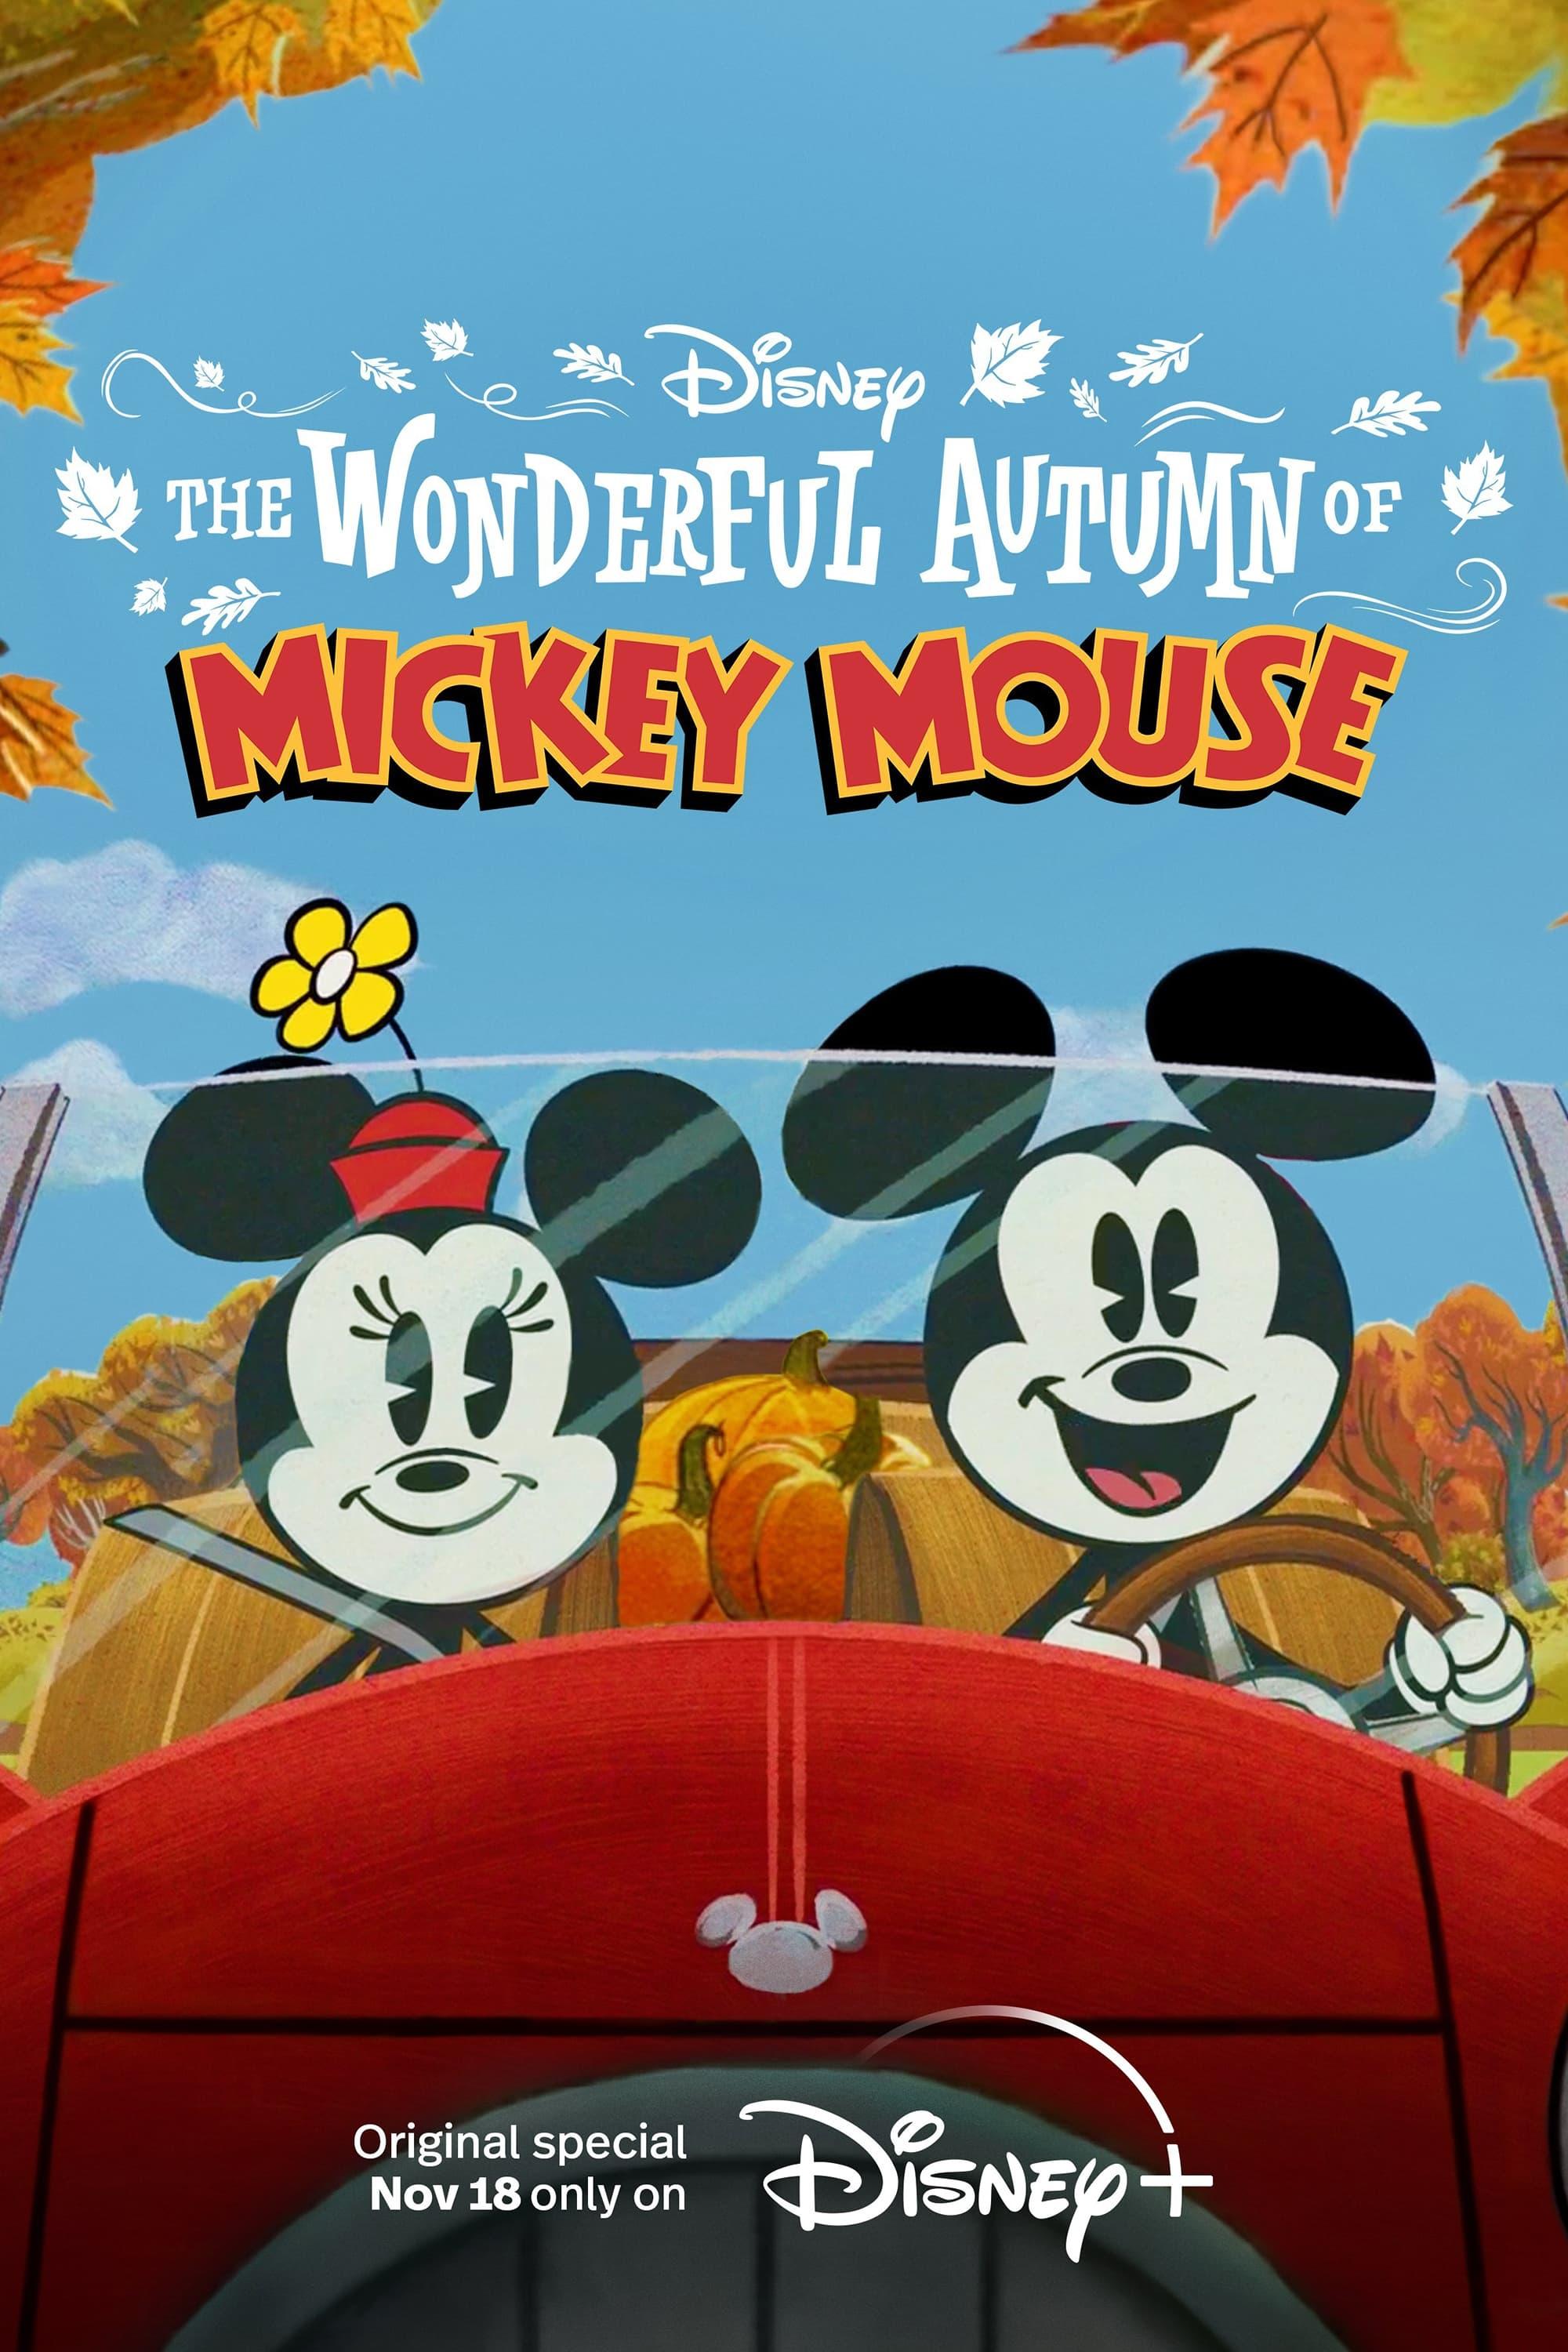 The Wonderful Autumn of Mickey Mouse poster